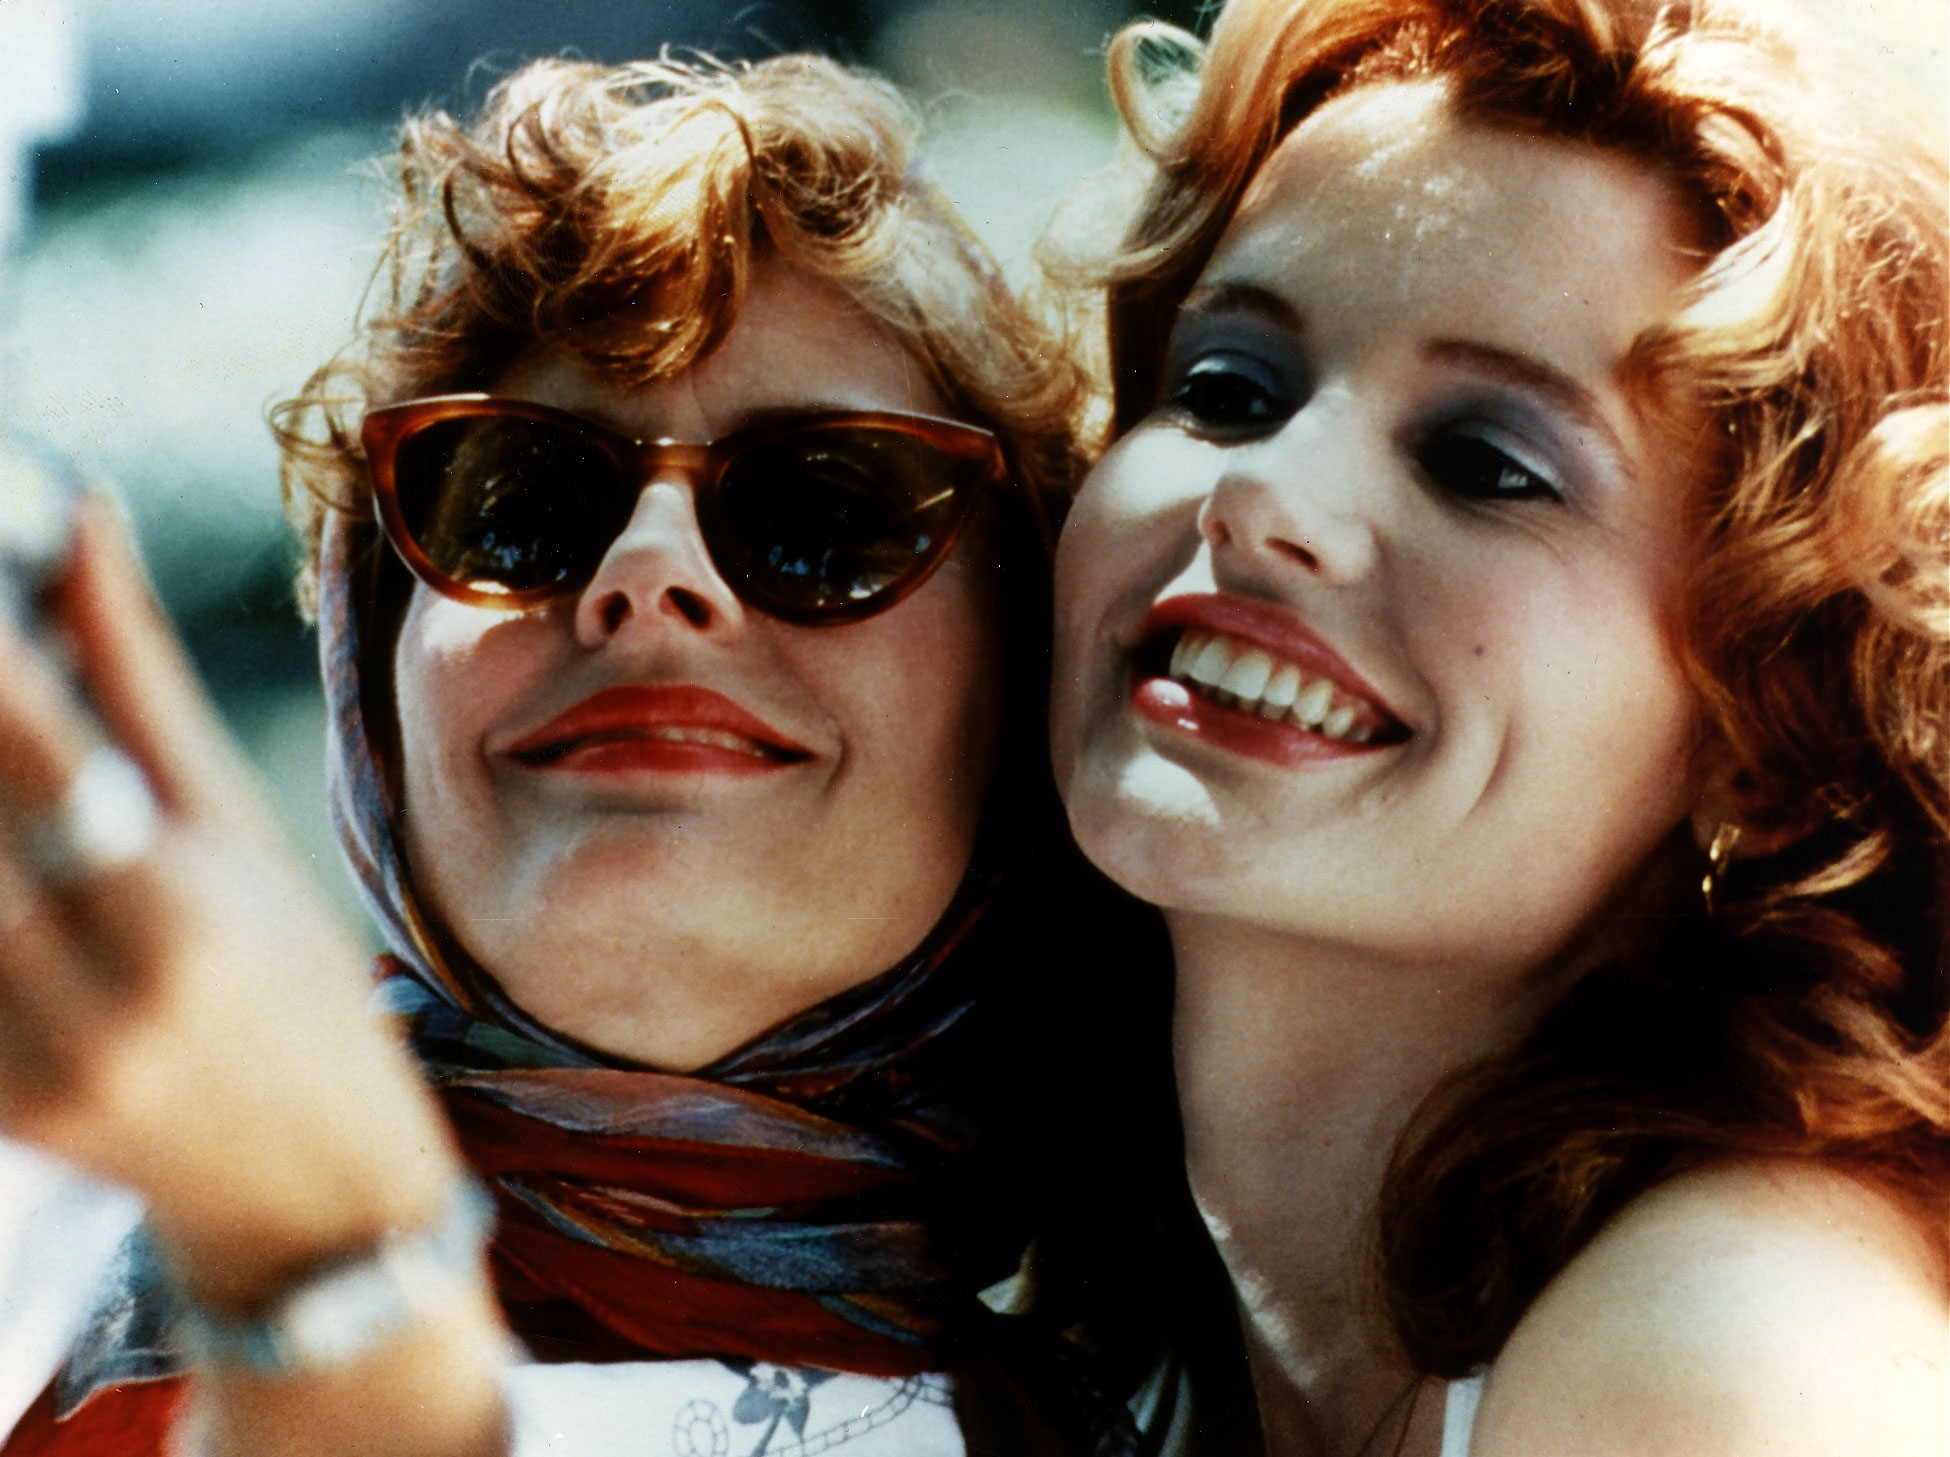 THELMA & LOUISE: THE TWENTIETH ANNIVERSARY HOMECOMING | CINEMATIC PASSIONS BY MIRANDA WILDING